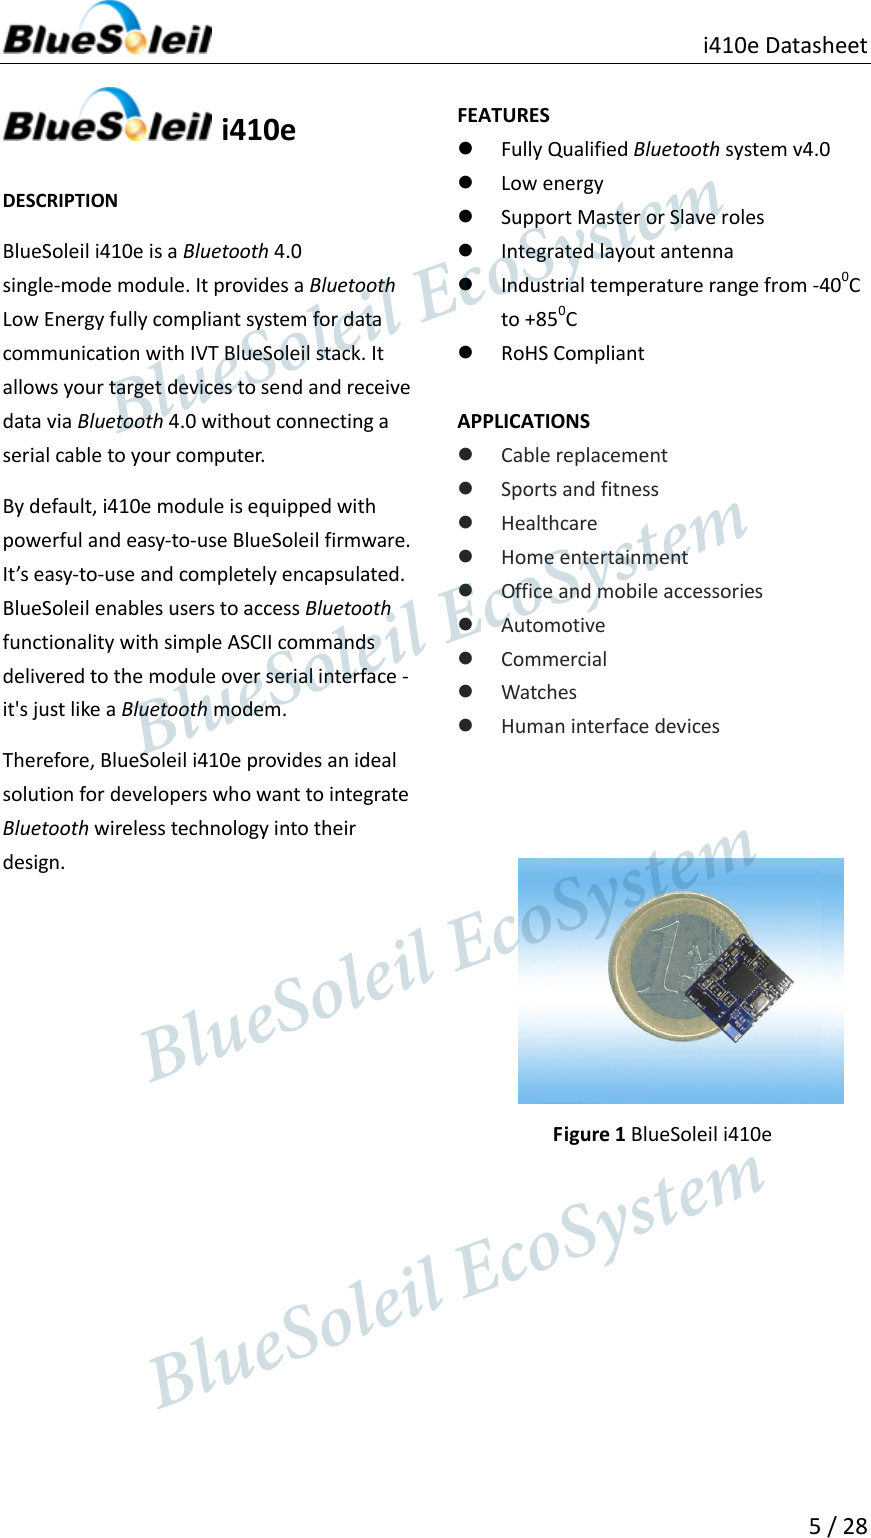                                               i410e Datasheet   5 / 28    i410e  DESCRIPTION BlueSoleil i410e is a Bluetooth 4.0 single-mode module. It provides a Bluetooth Low Energy fully compliant system for data communication with IVT BlueSoleil stack. It allows your target devices to send and receive data via Bluetooth 4.0 without connecting a serial cable to your computer.   By default, i410e module is equipped with powerful and easy-to-use BlueSoleil firmware. It’s easy-to-use and completely encapsulated. BlueSoleil enables users to access Bluetooth functionality with simple ASCII commands delivered to the module over serial interface - it&apos;s just like a Bluetooth modem. Therefore, BlueSoleil i410e provides an ideal solution for developers who want to integrate Bluetooth wireless technology into their design.                    FEATURES  Fully Qualified Bluetooth system v4.0  Low energy  Support Master or Slave roles  Integrated layout antenna  Industrial temperature range from -400C to +850C  RoHS Compliant  APPLICATIONS  Cable replacement  Sports and fitness  Healthcare  Home entertainment  Office and mobile accessories  Automotive  Commercial  Watches  Human interface devices         Figure 1 BlueSoleil i410e                            BlueSoleil EcoSystem            BlueSoleil EcoSystem      BlueSoleil EcoSystemBlueSoleil EcoSystem